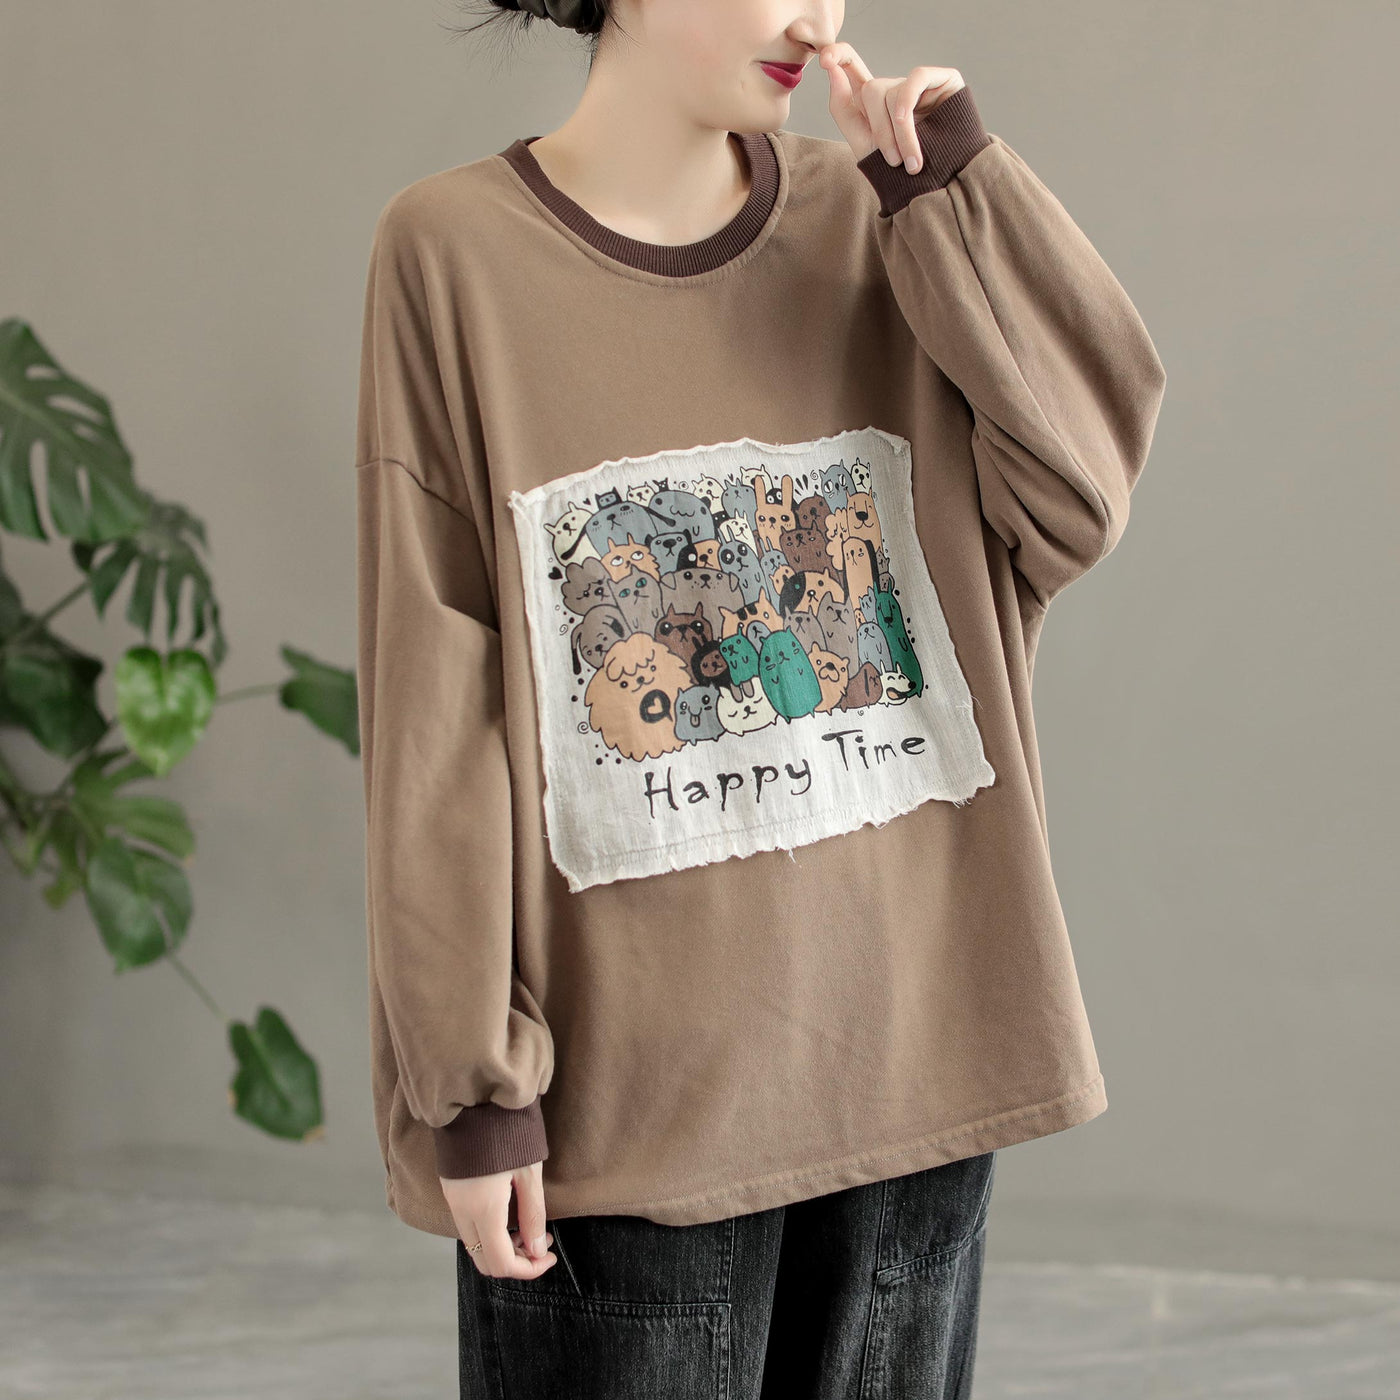 Women Casual Chic Patchwork Cotton Sweater